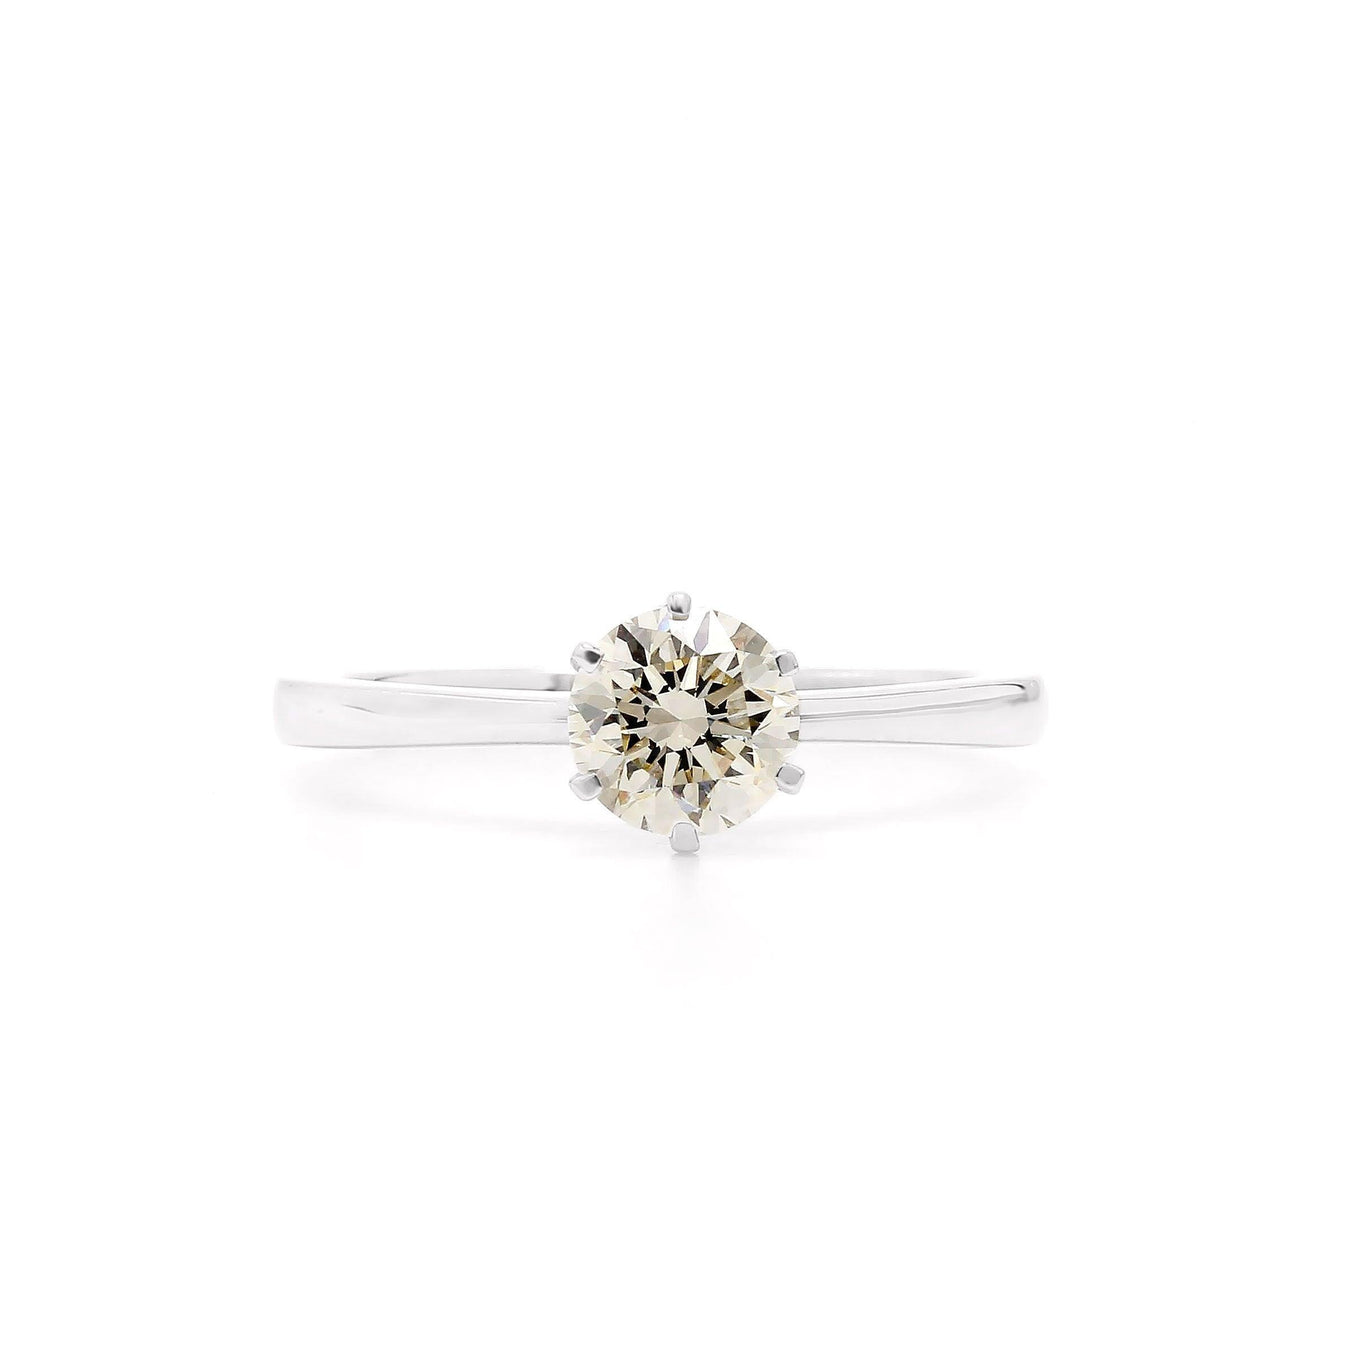 Vintage Inspired Engagement Rings